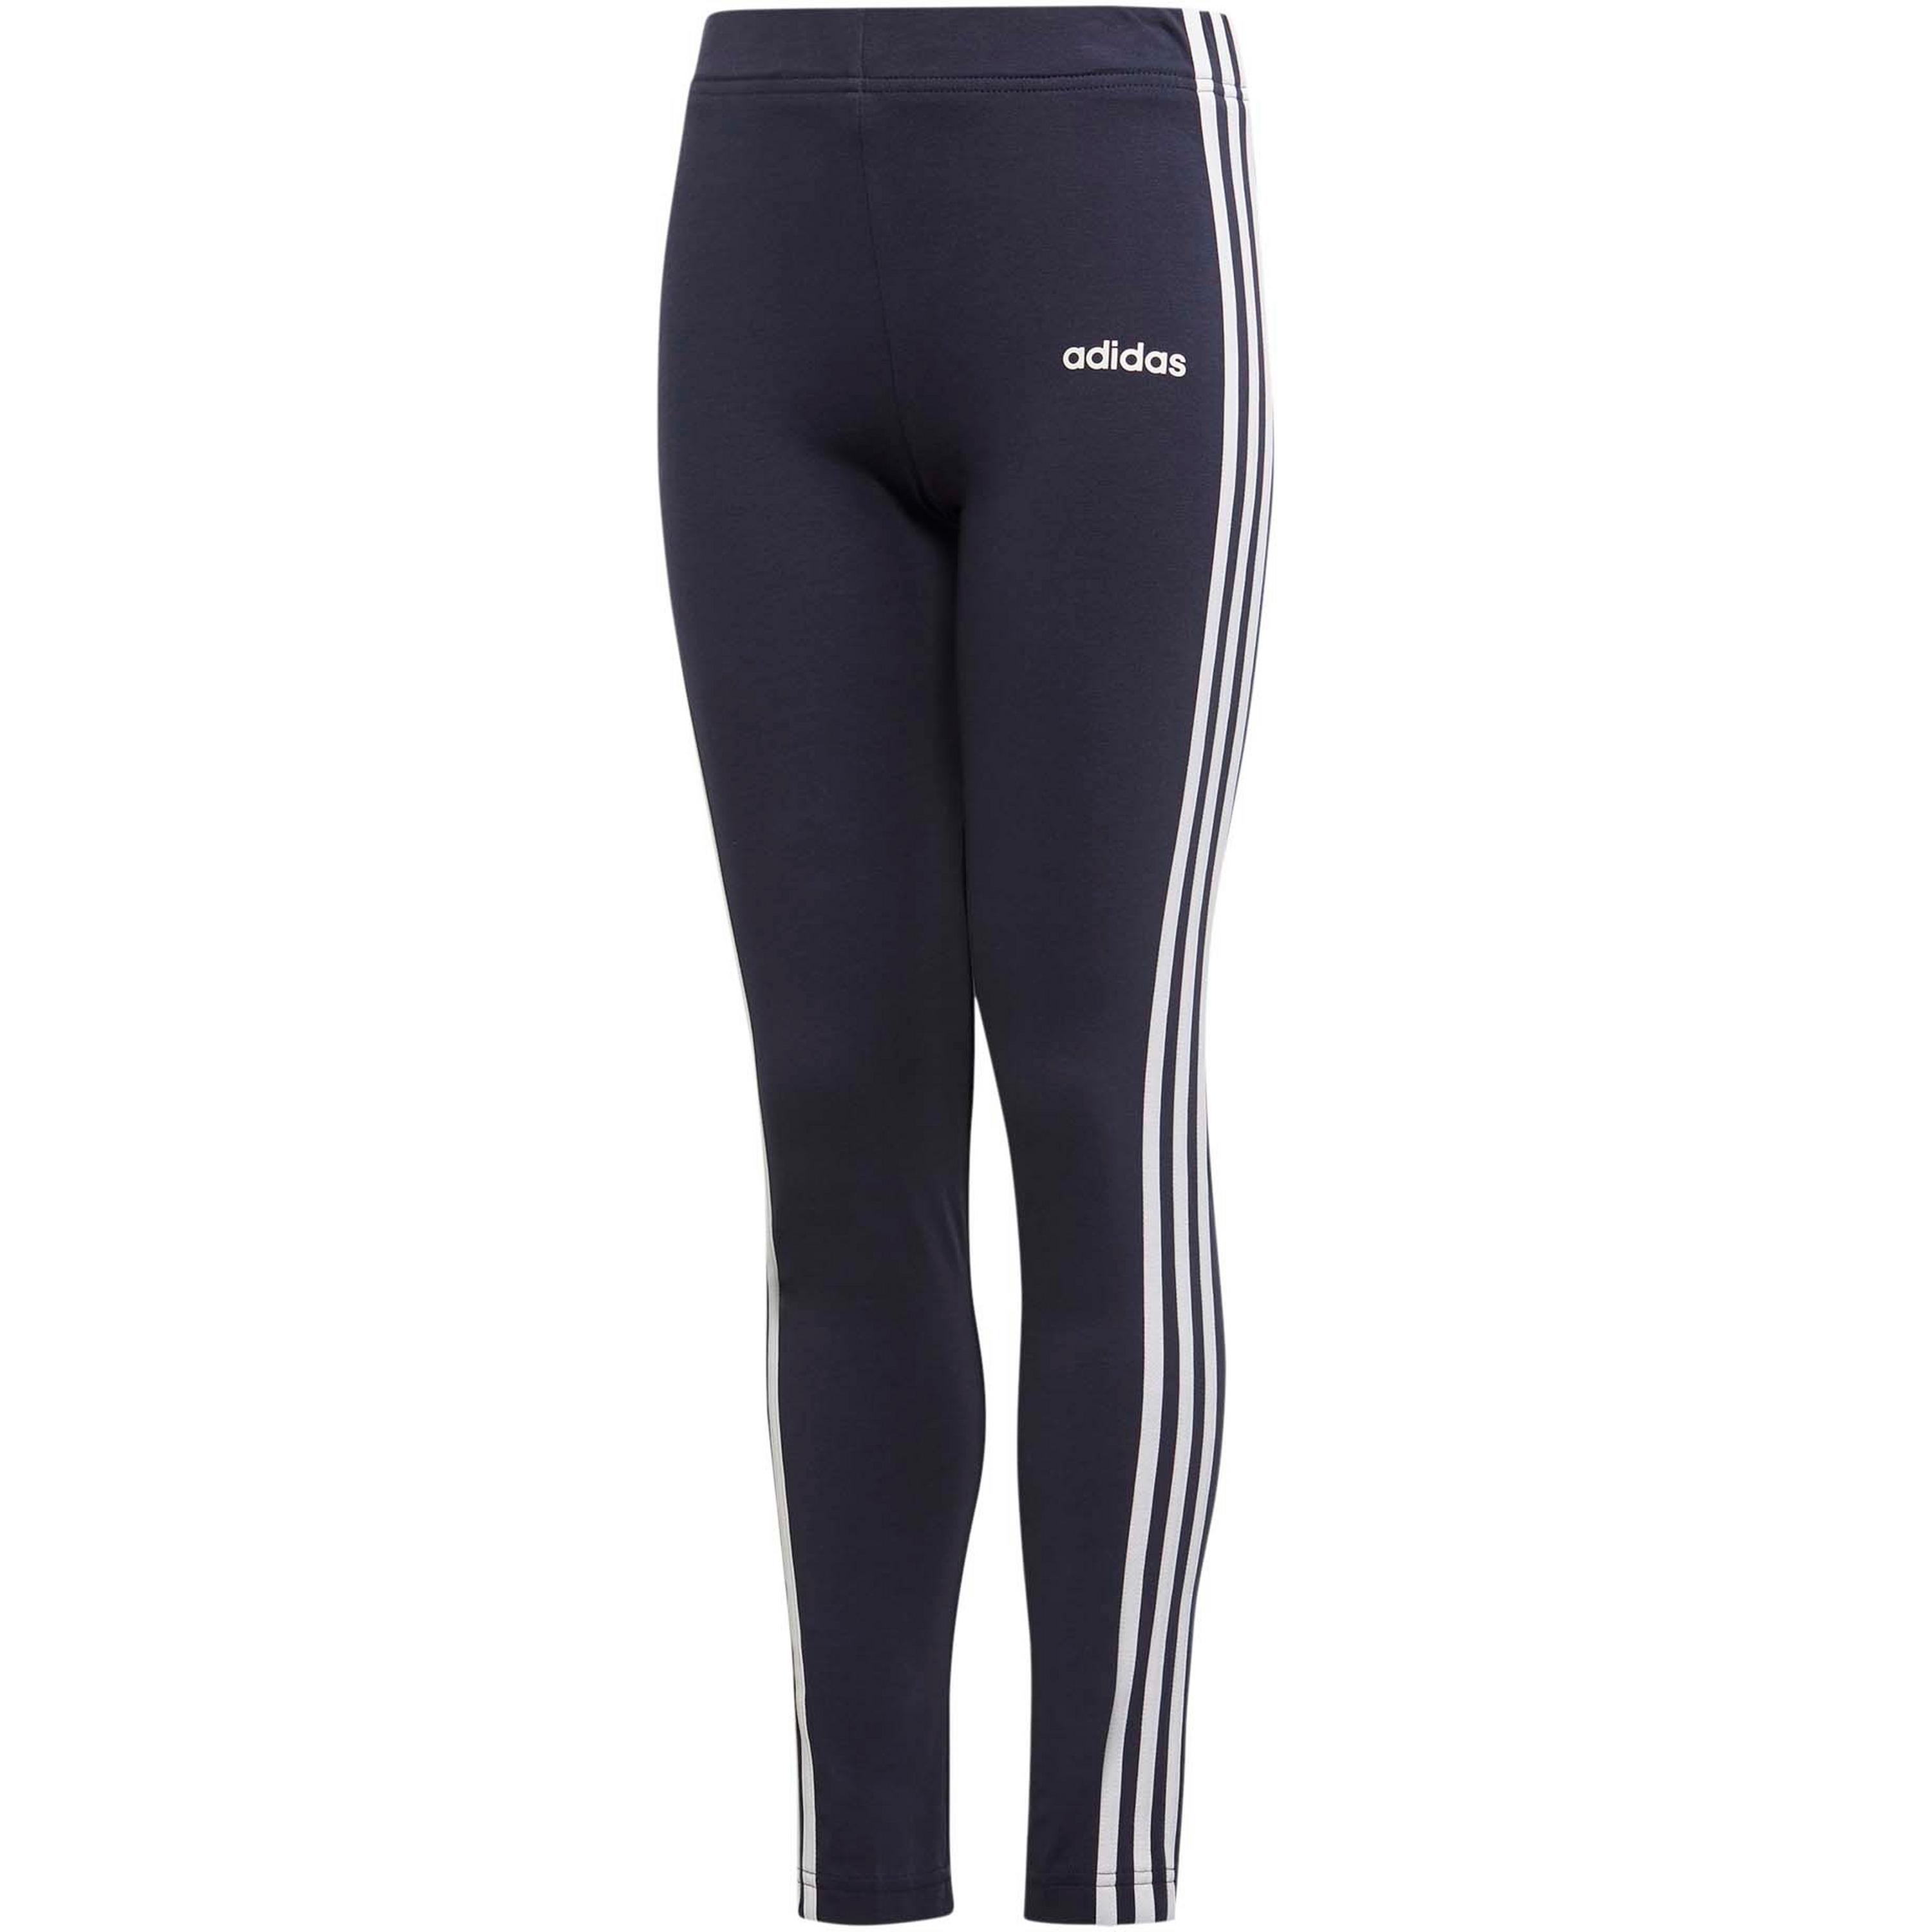 Image of adidas 3 STRIPES Tights Mädchen